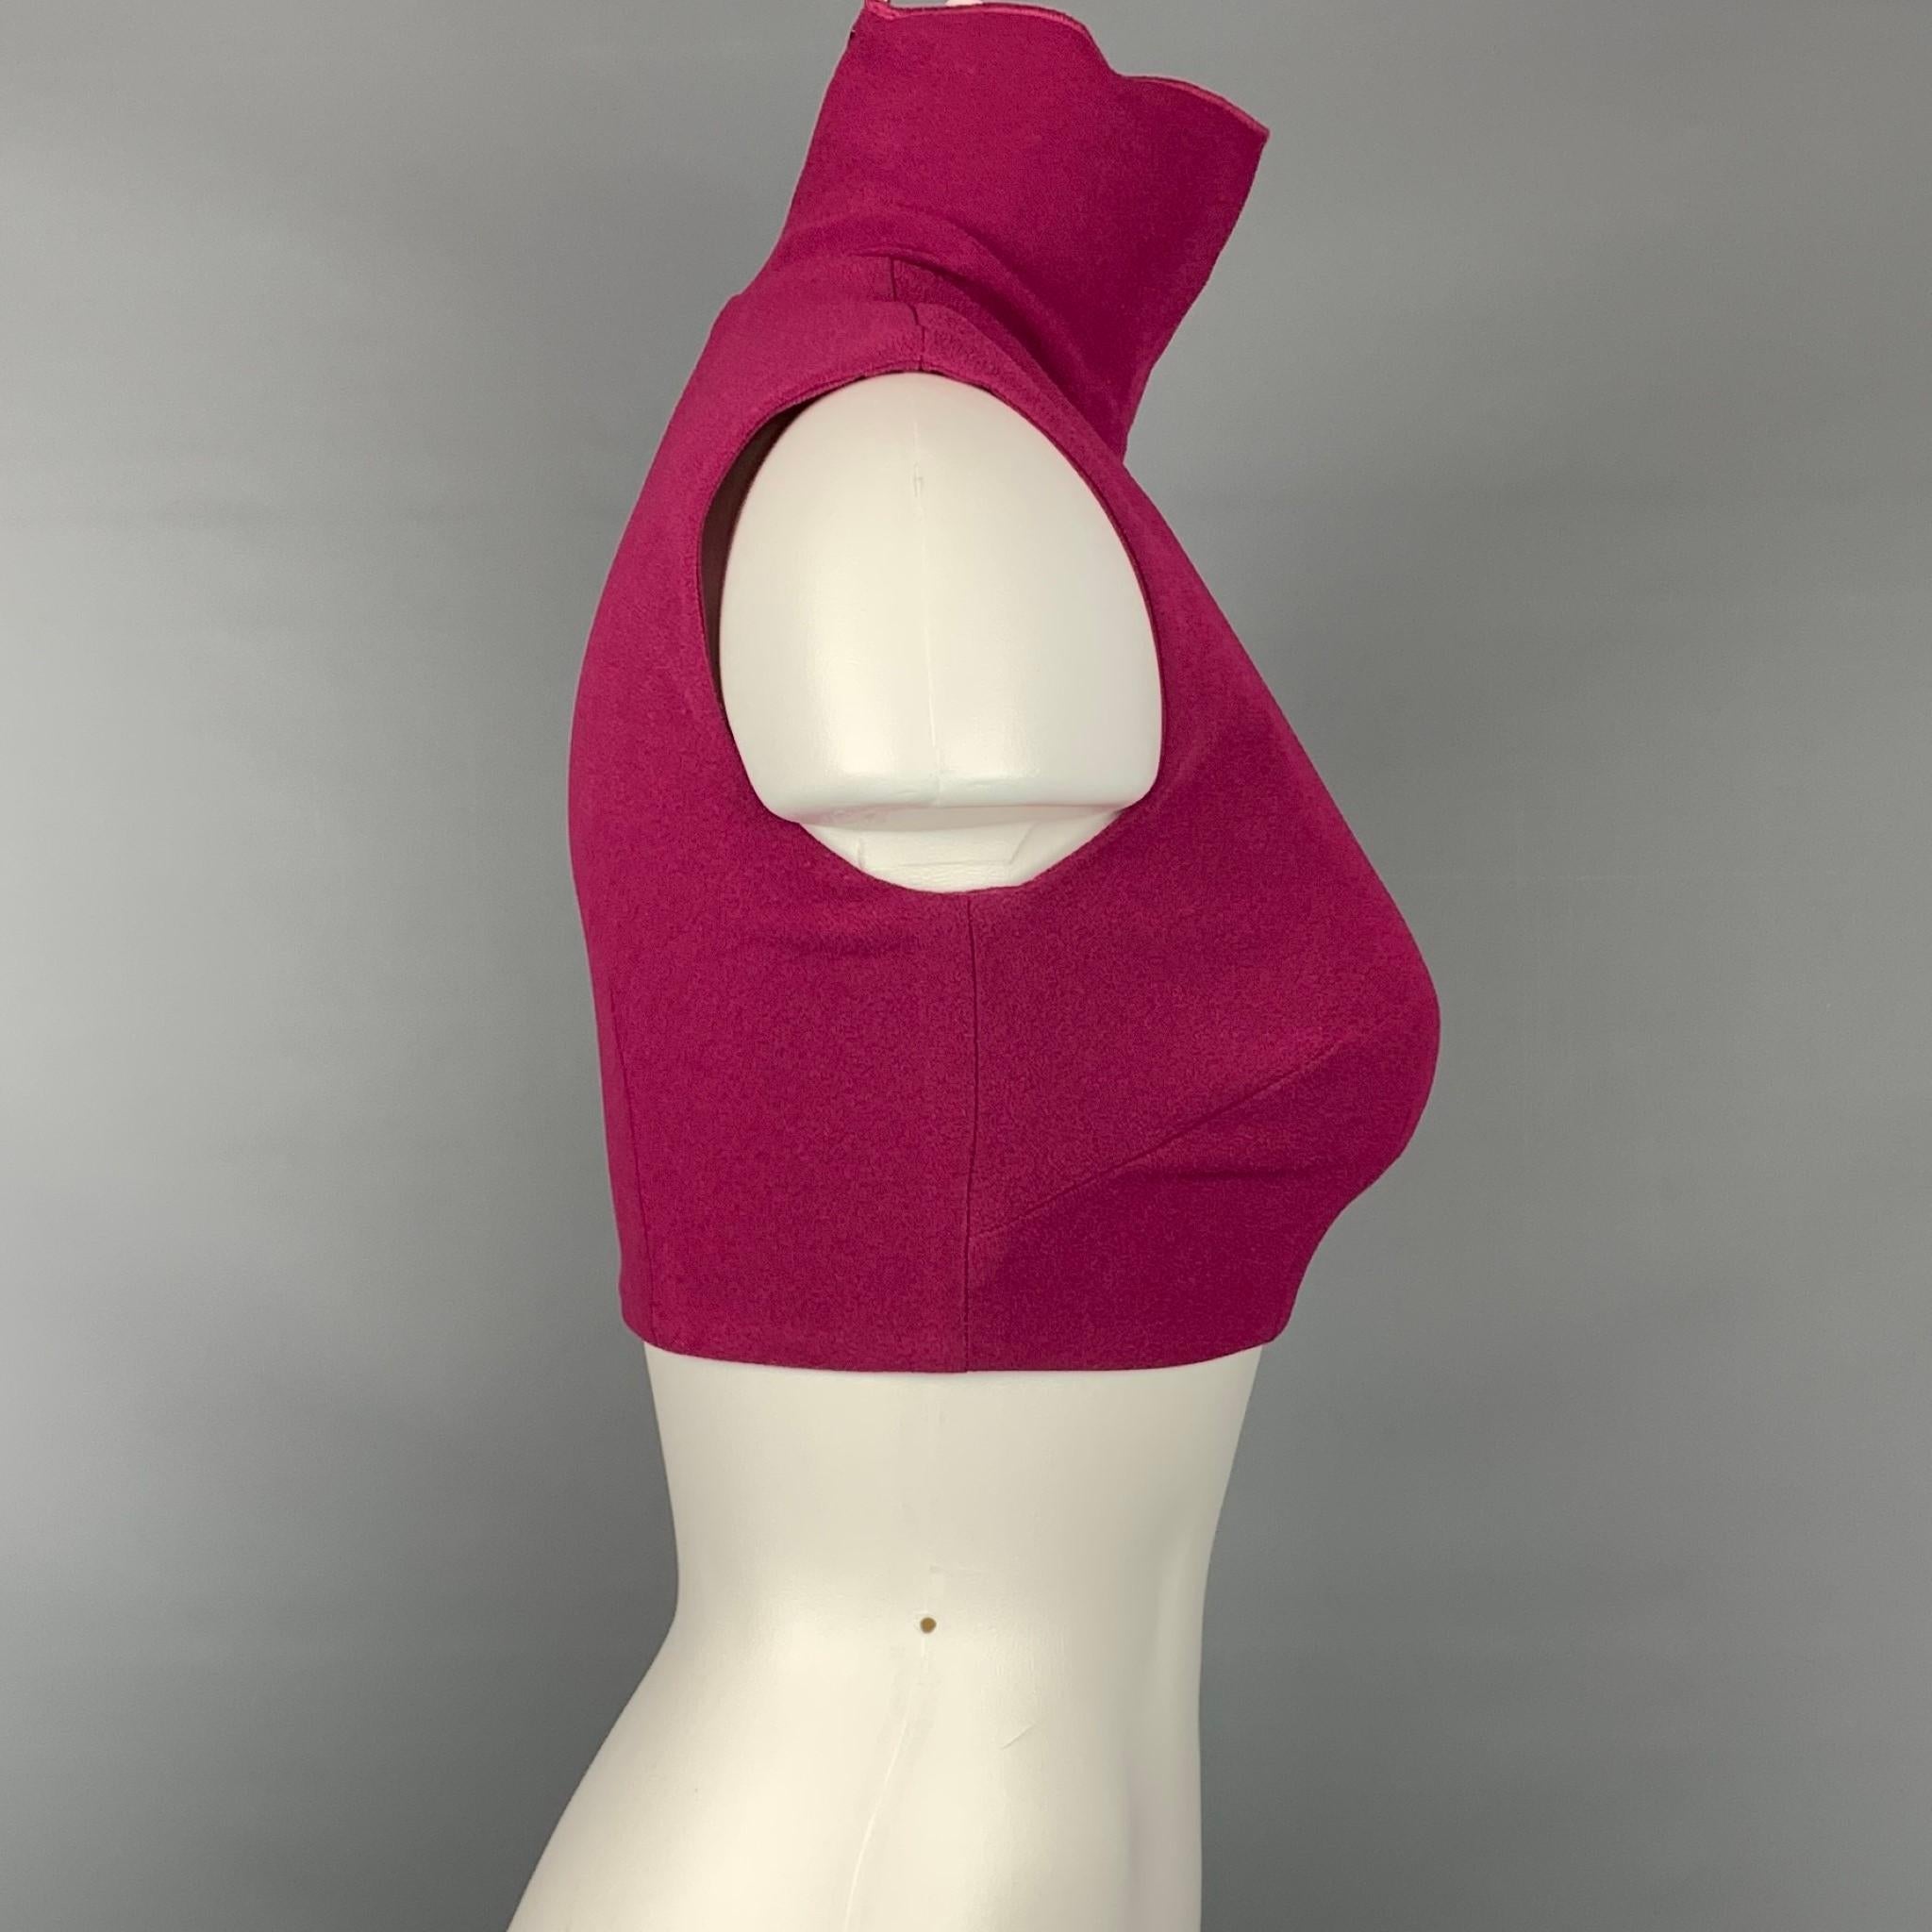 ALEX PERRY top comes in a raspberry stretch crepe featuring a high turtleneck, cropped, and a back zipper closure. 

Very Good Pre-Owned Condition.
Marked: 6
Original Retail Price: $800.00

Measurements:

Shoulder: 13.5 in.
Bust: 32 in.
Length: 12